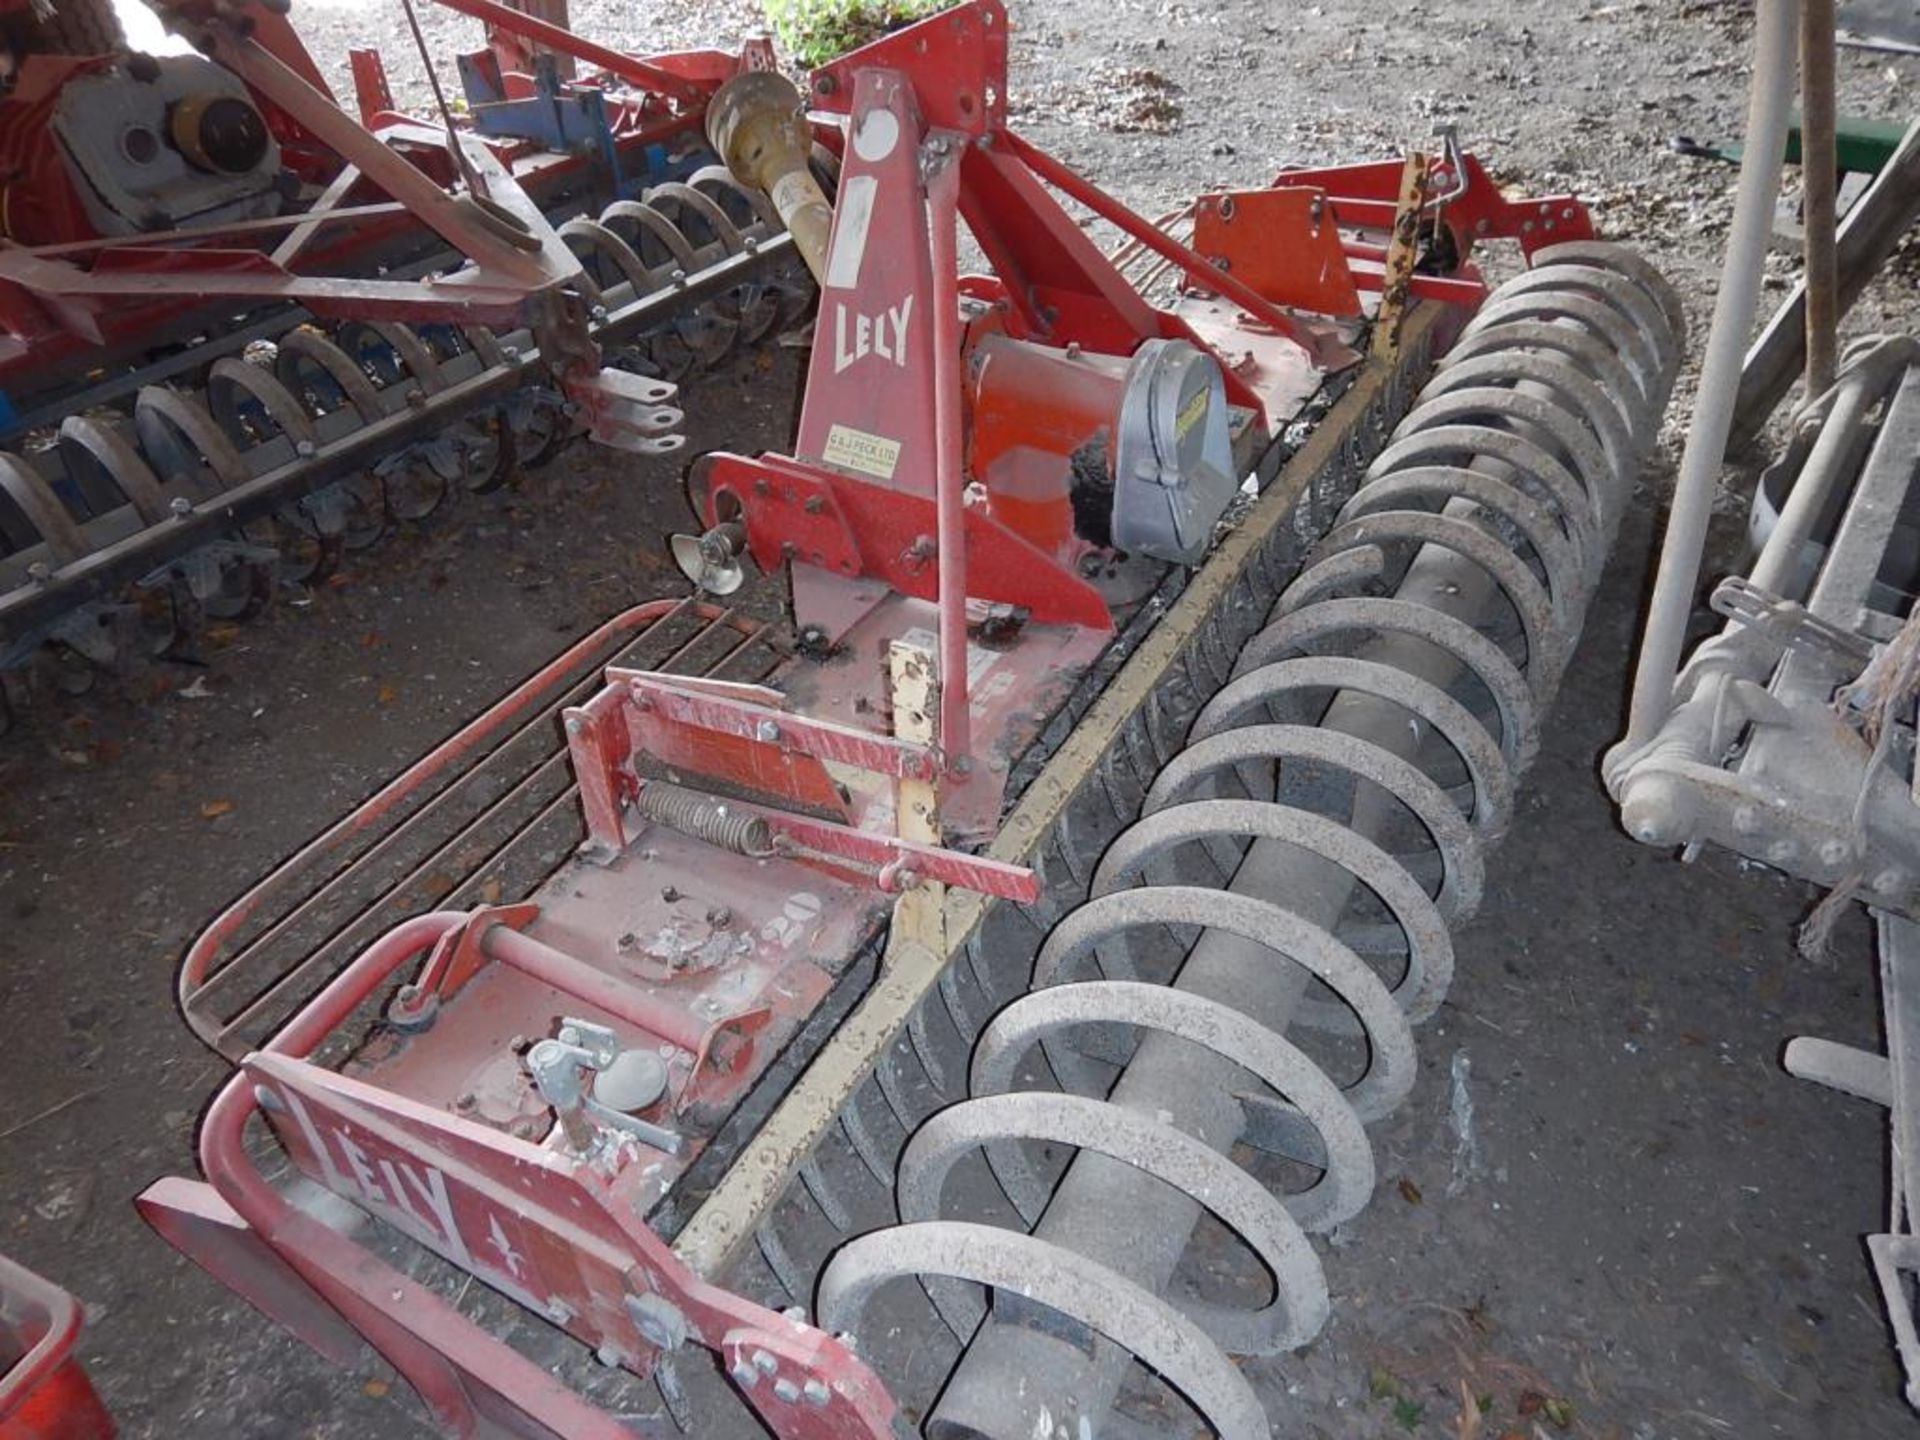 Lely 300-20 3m power harrow fitted with spiral crumbler roller - Image 2 of 2